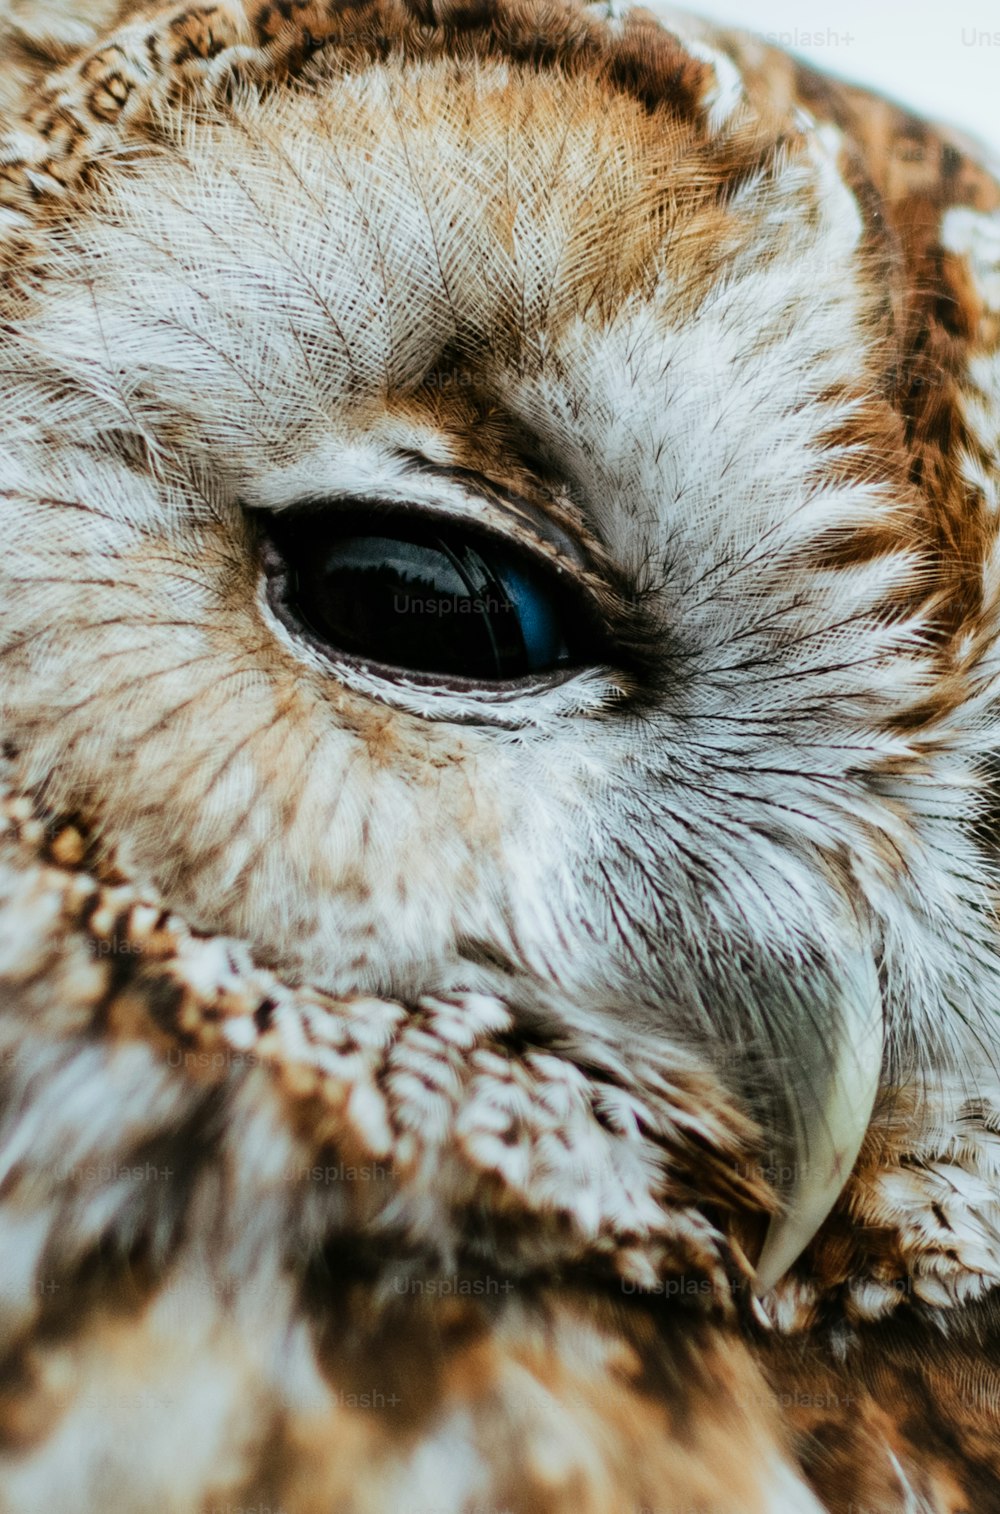 a close up of an owl's eye with a blurry background